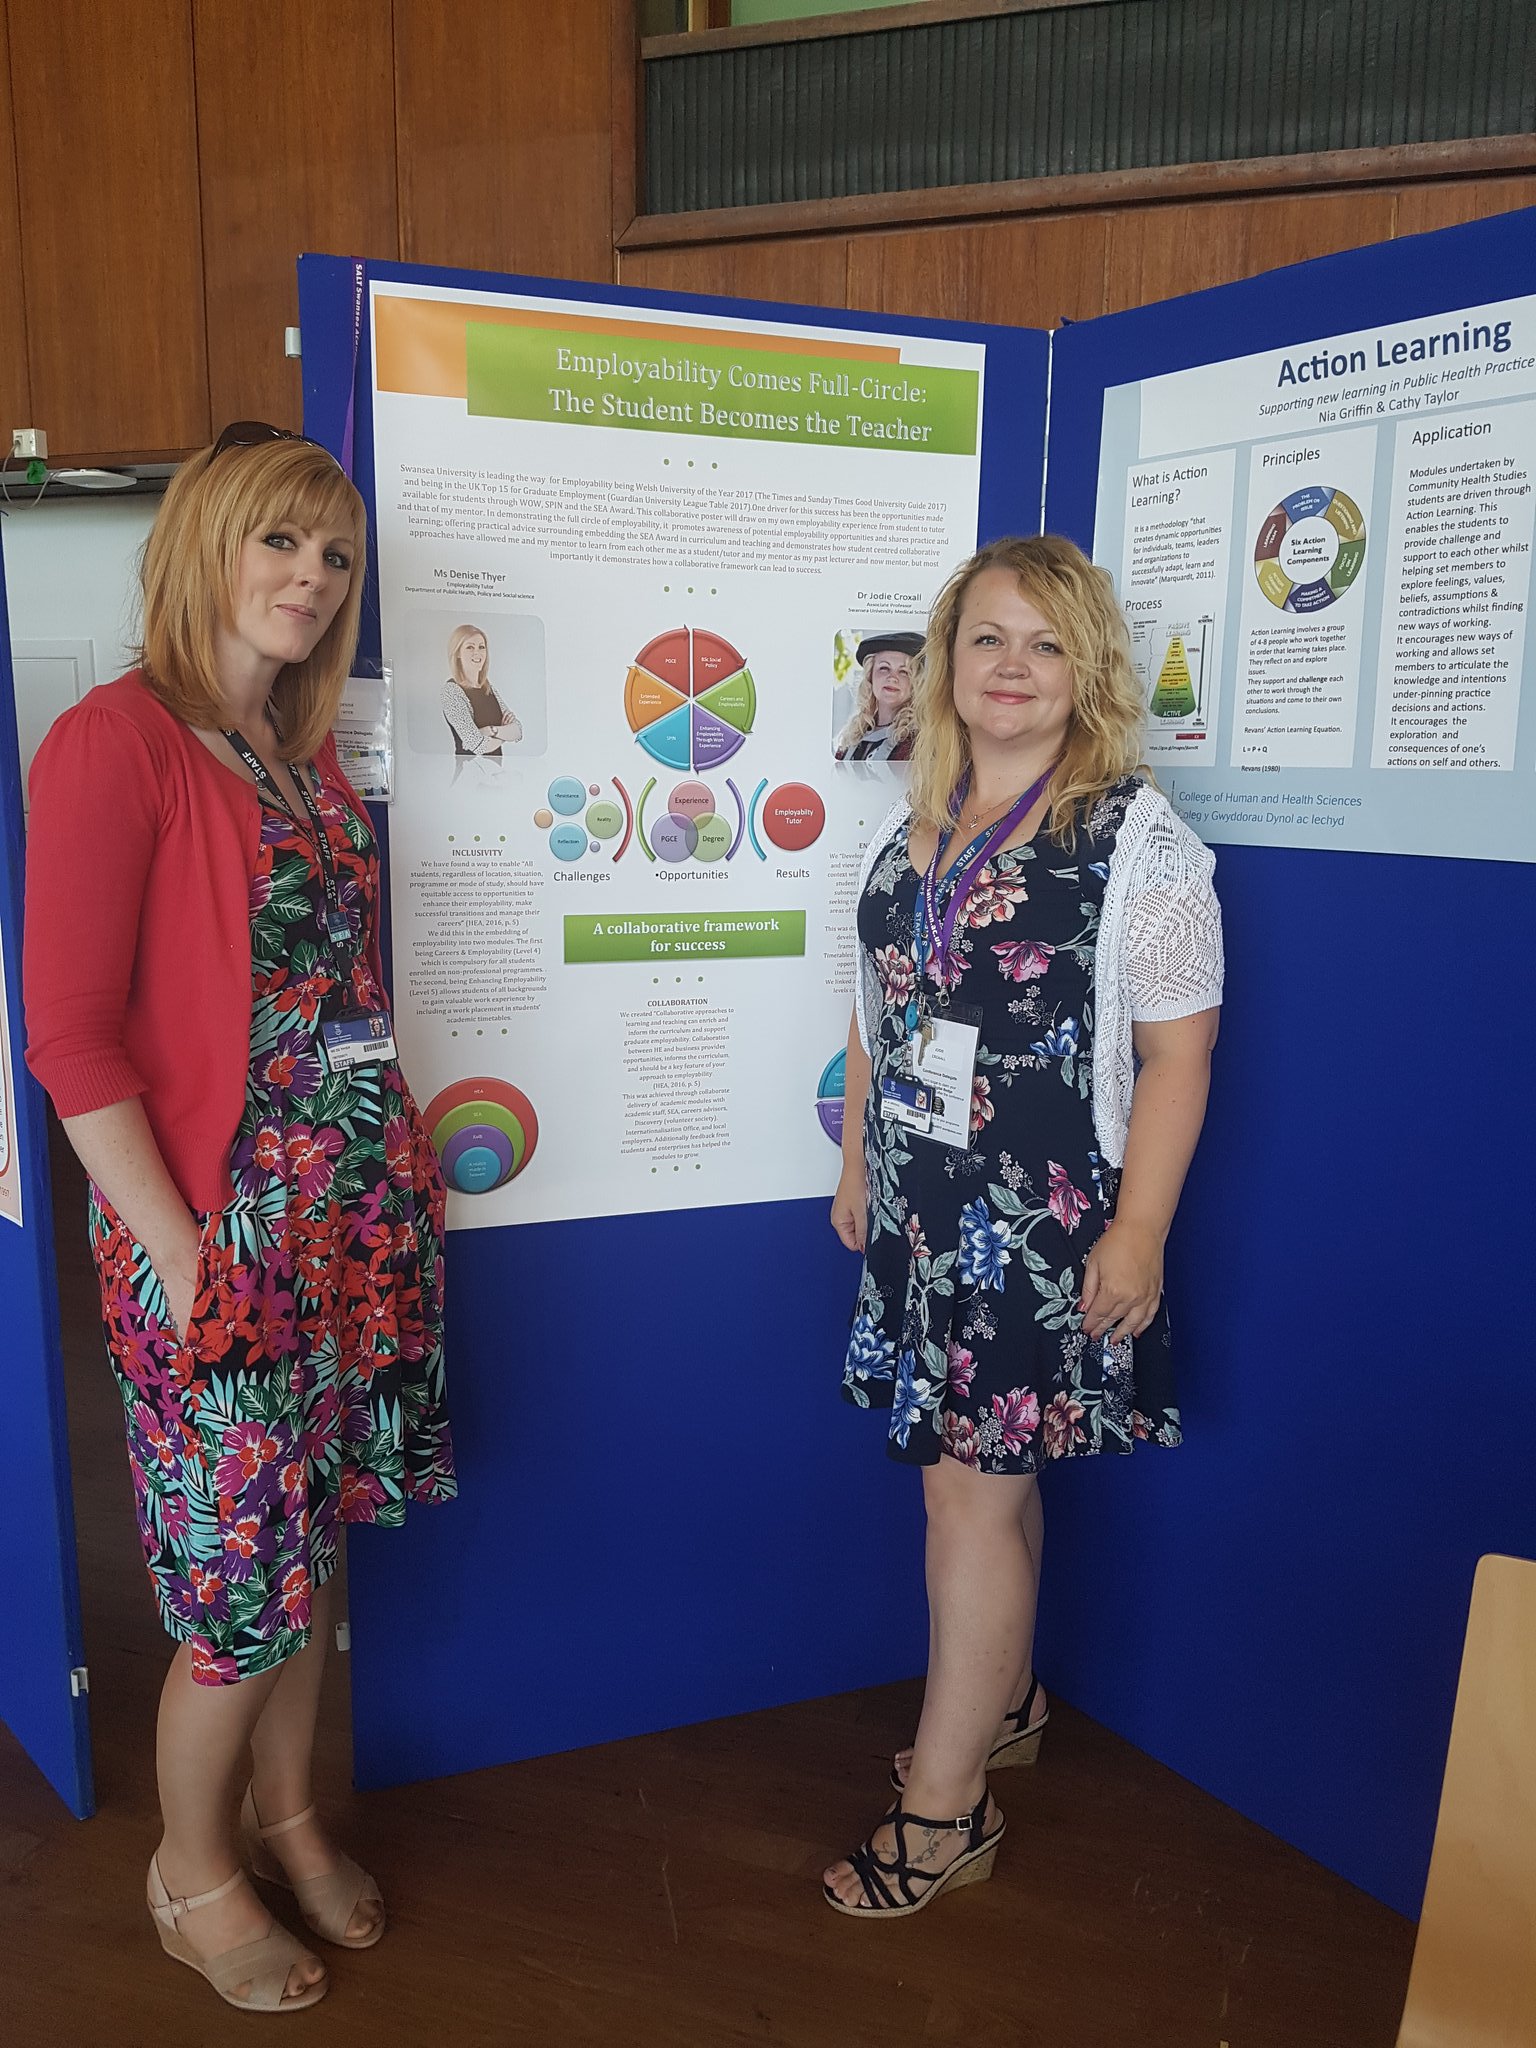 @JodieCrox feeling proud with Dee Thyer at #SUSALT17 poster session @HumanandHealth @SwanseaMedicine @SwanseaUniSEA https://t.co/sXEyrmYtpB